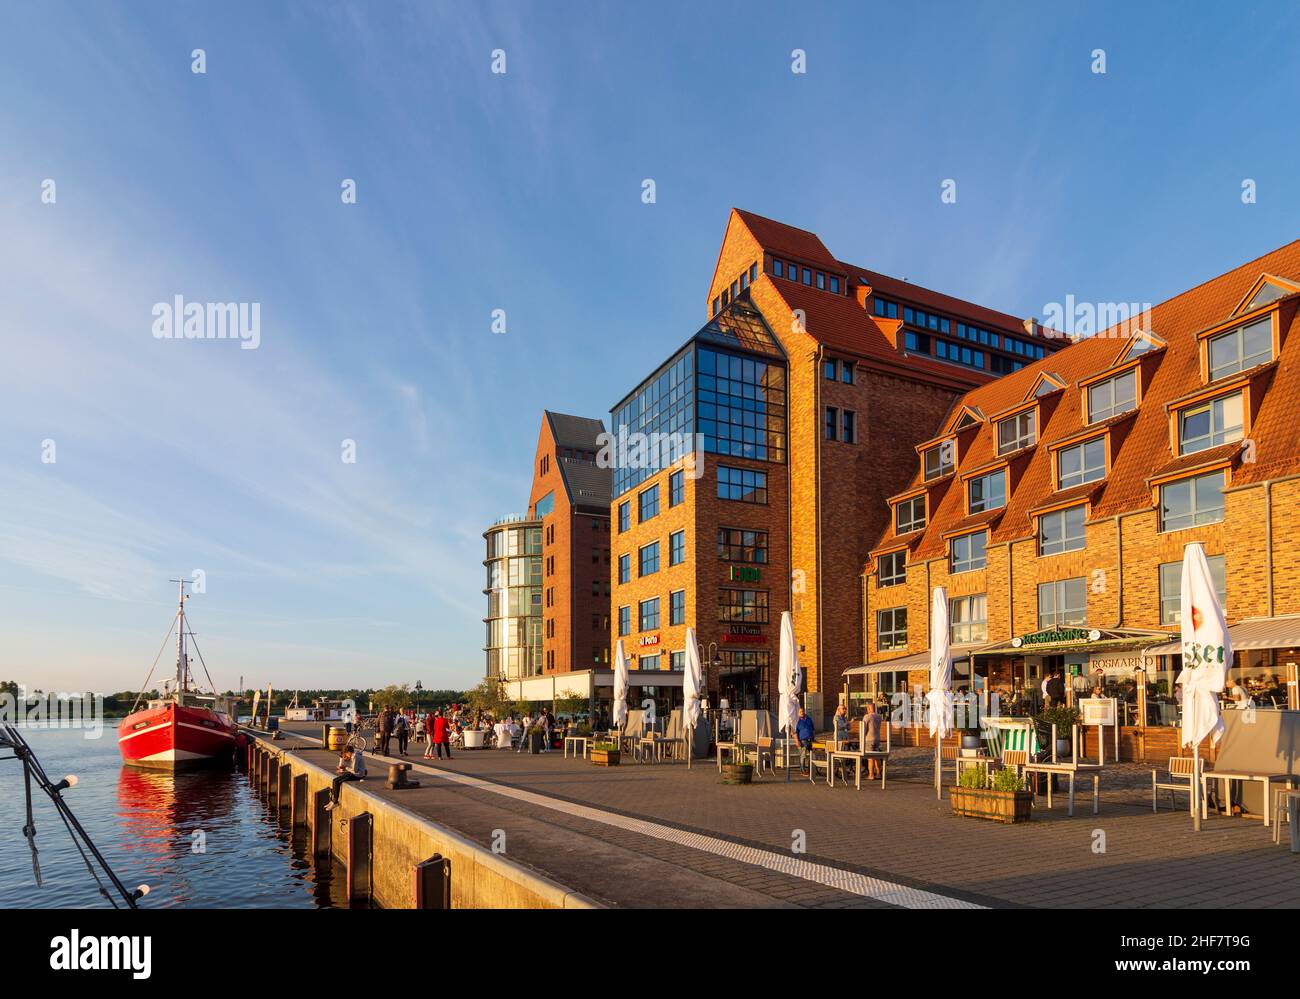 Rostock,  fish snack seller from fishing ship,  commercial buildings in the eastern part of the city harbor in the style of the warehouse buildings in Ostsee (Baltic Sea),  Mecklenburg-Vorpommern,  Germany Stock Photo